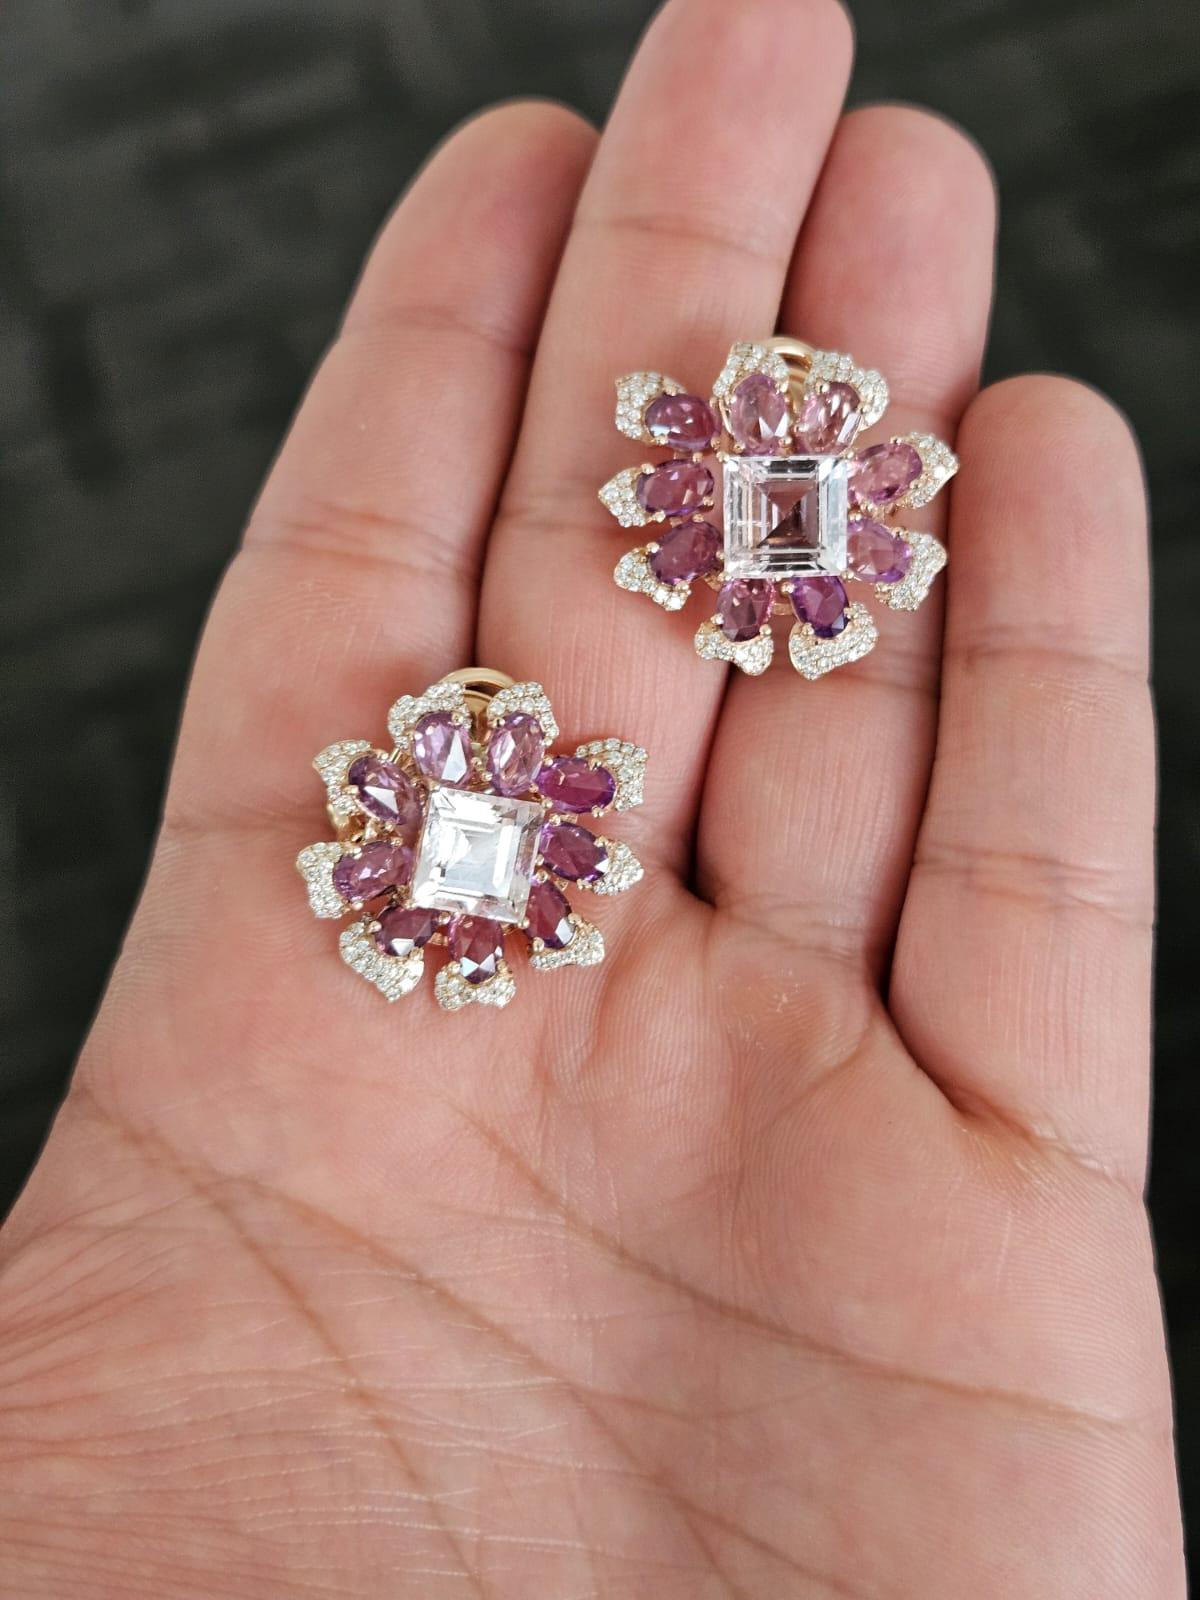 A very gorgeous and beautiful, Morganite & Pink Sapphire Stud Earrings set in 18K Rose Gold & Diamonds. The weight of the Morganites is 5.97 carats. The Pink Sapphires weight is 6.67 carats. The Diamonds weight is 0.72 carats. Net 18K Gold weight is